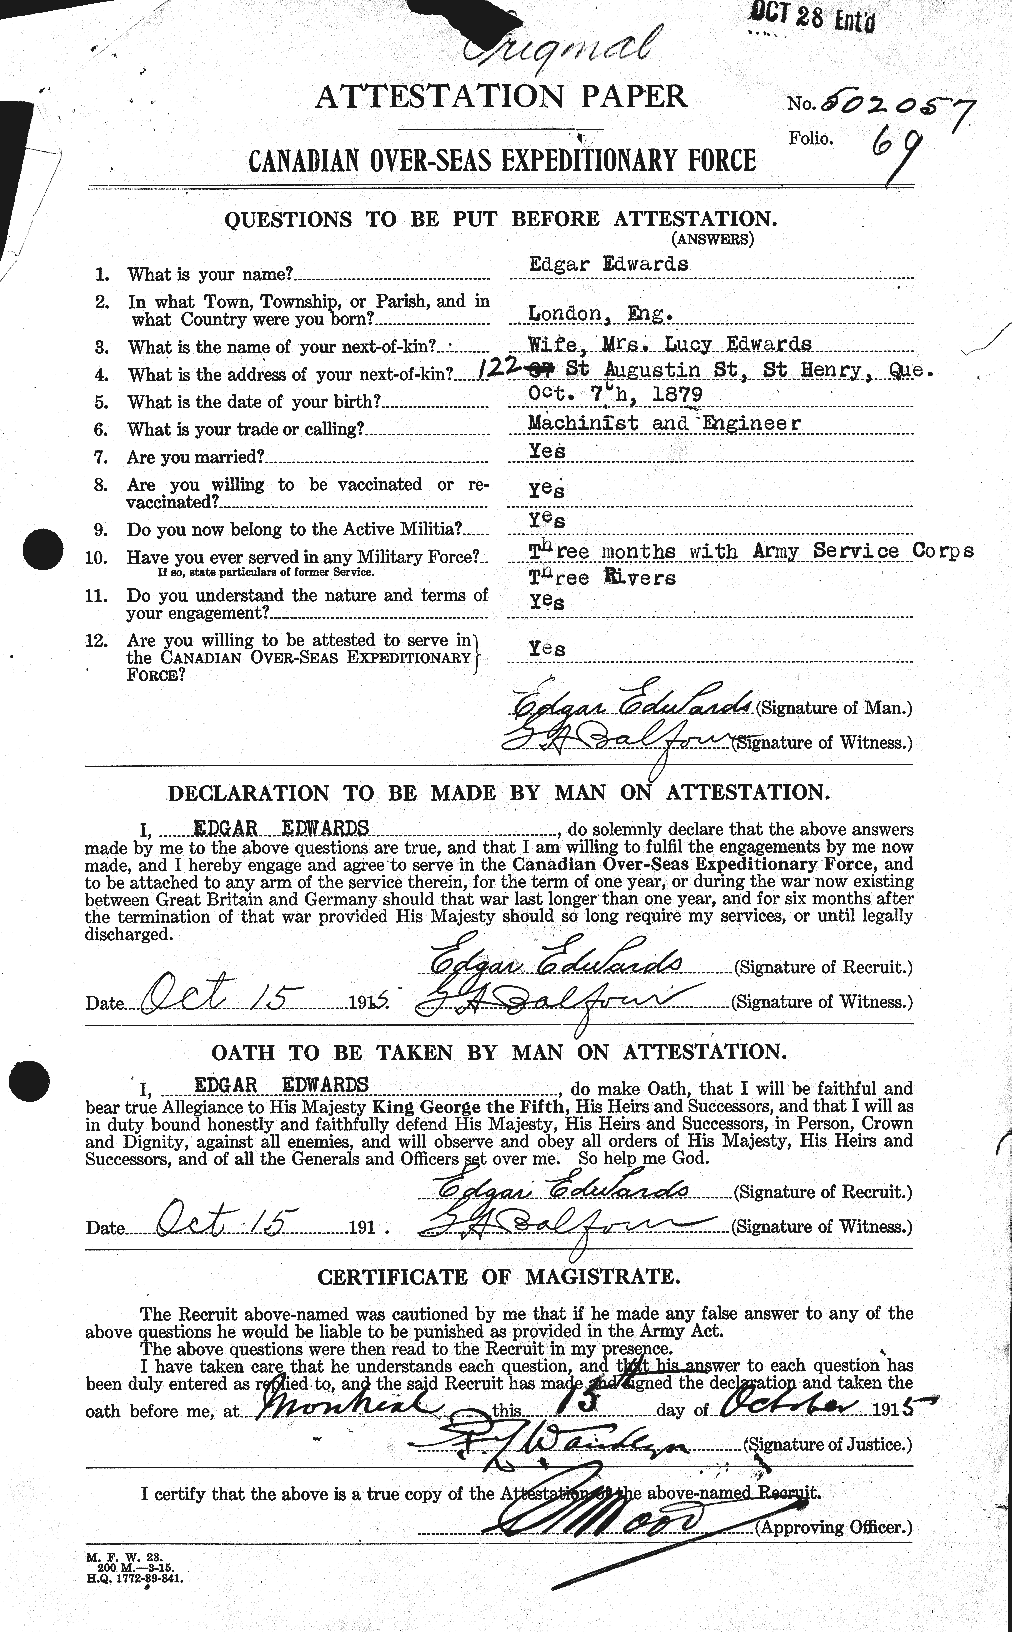 Personnel Records of the First World War - CEF 307890a